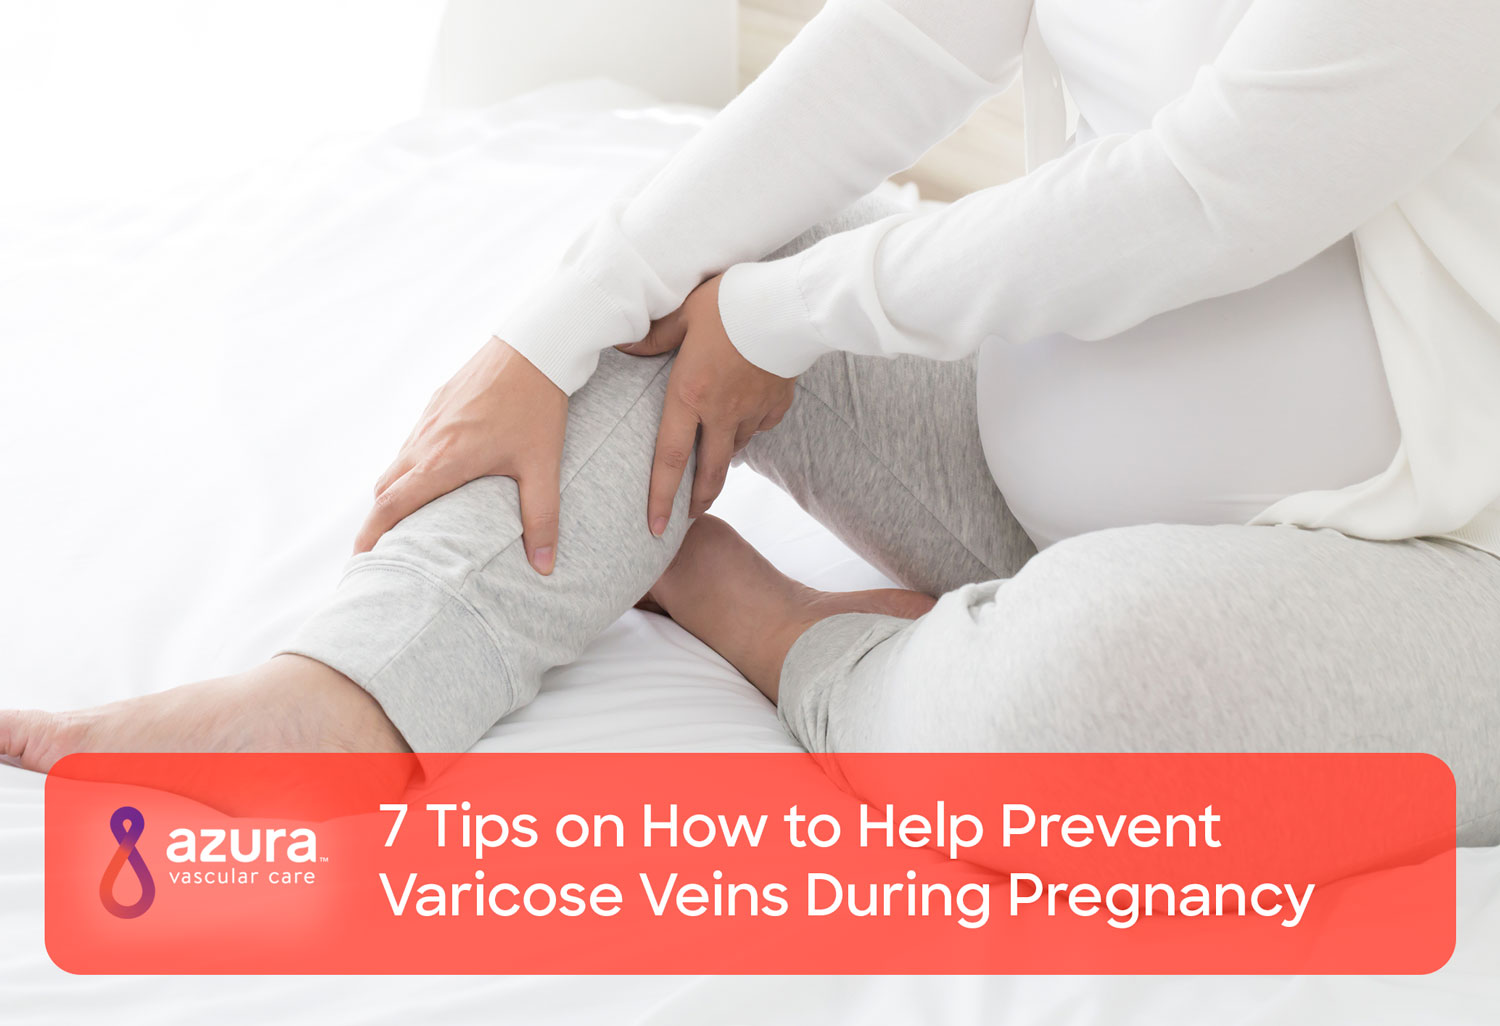 How to Help Prevent Varicose Veins During Pregnancy